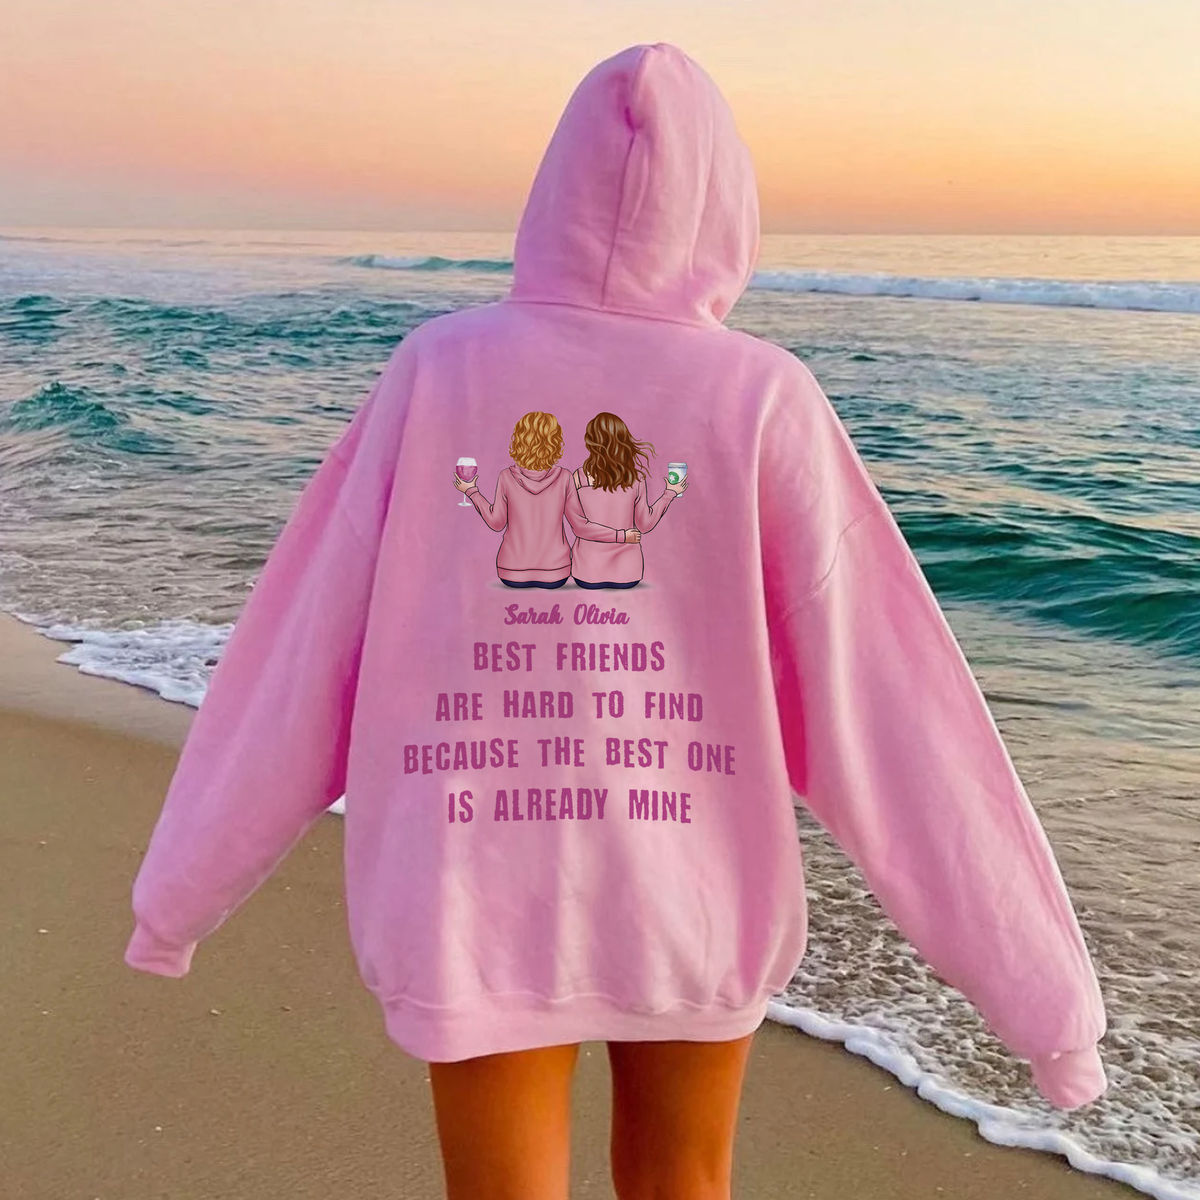 Bestfriend Hoodie - Best friends are hard to find because the best is already mine | Oversized Beach Hoodie | Gift for Her | Trendy Positive Hoodie_1